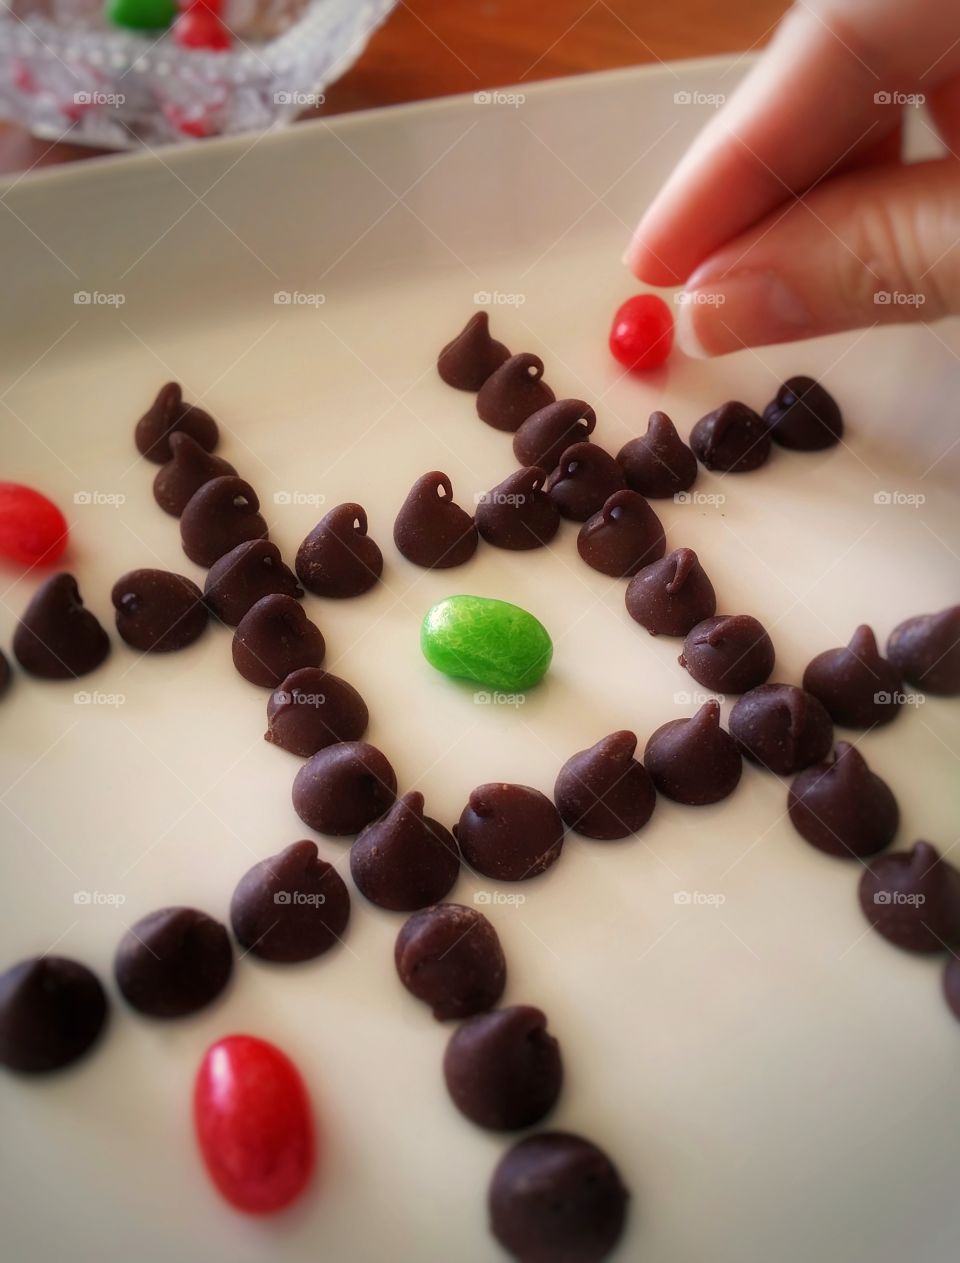 Playing tic-tac-toe with green and red jellybeans and chocolate chips